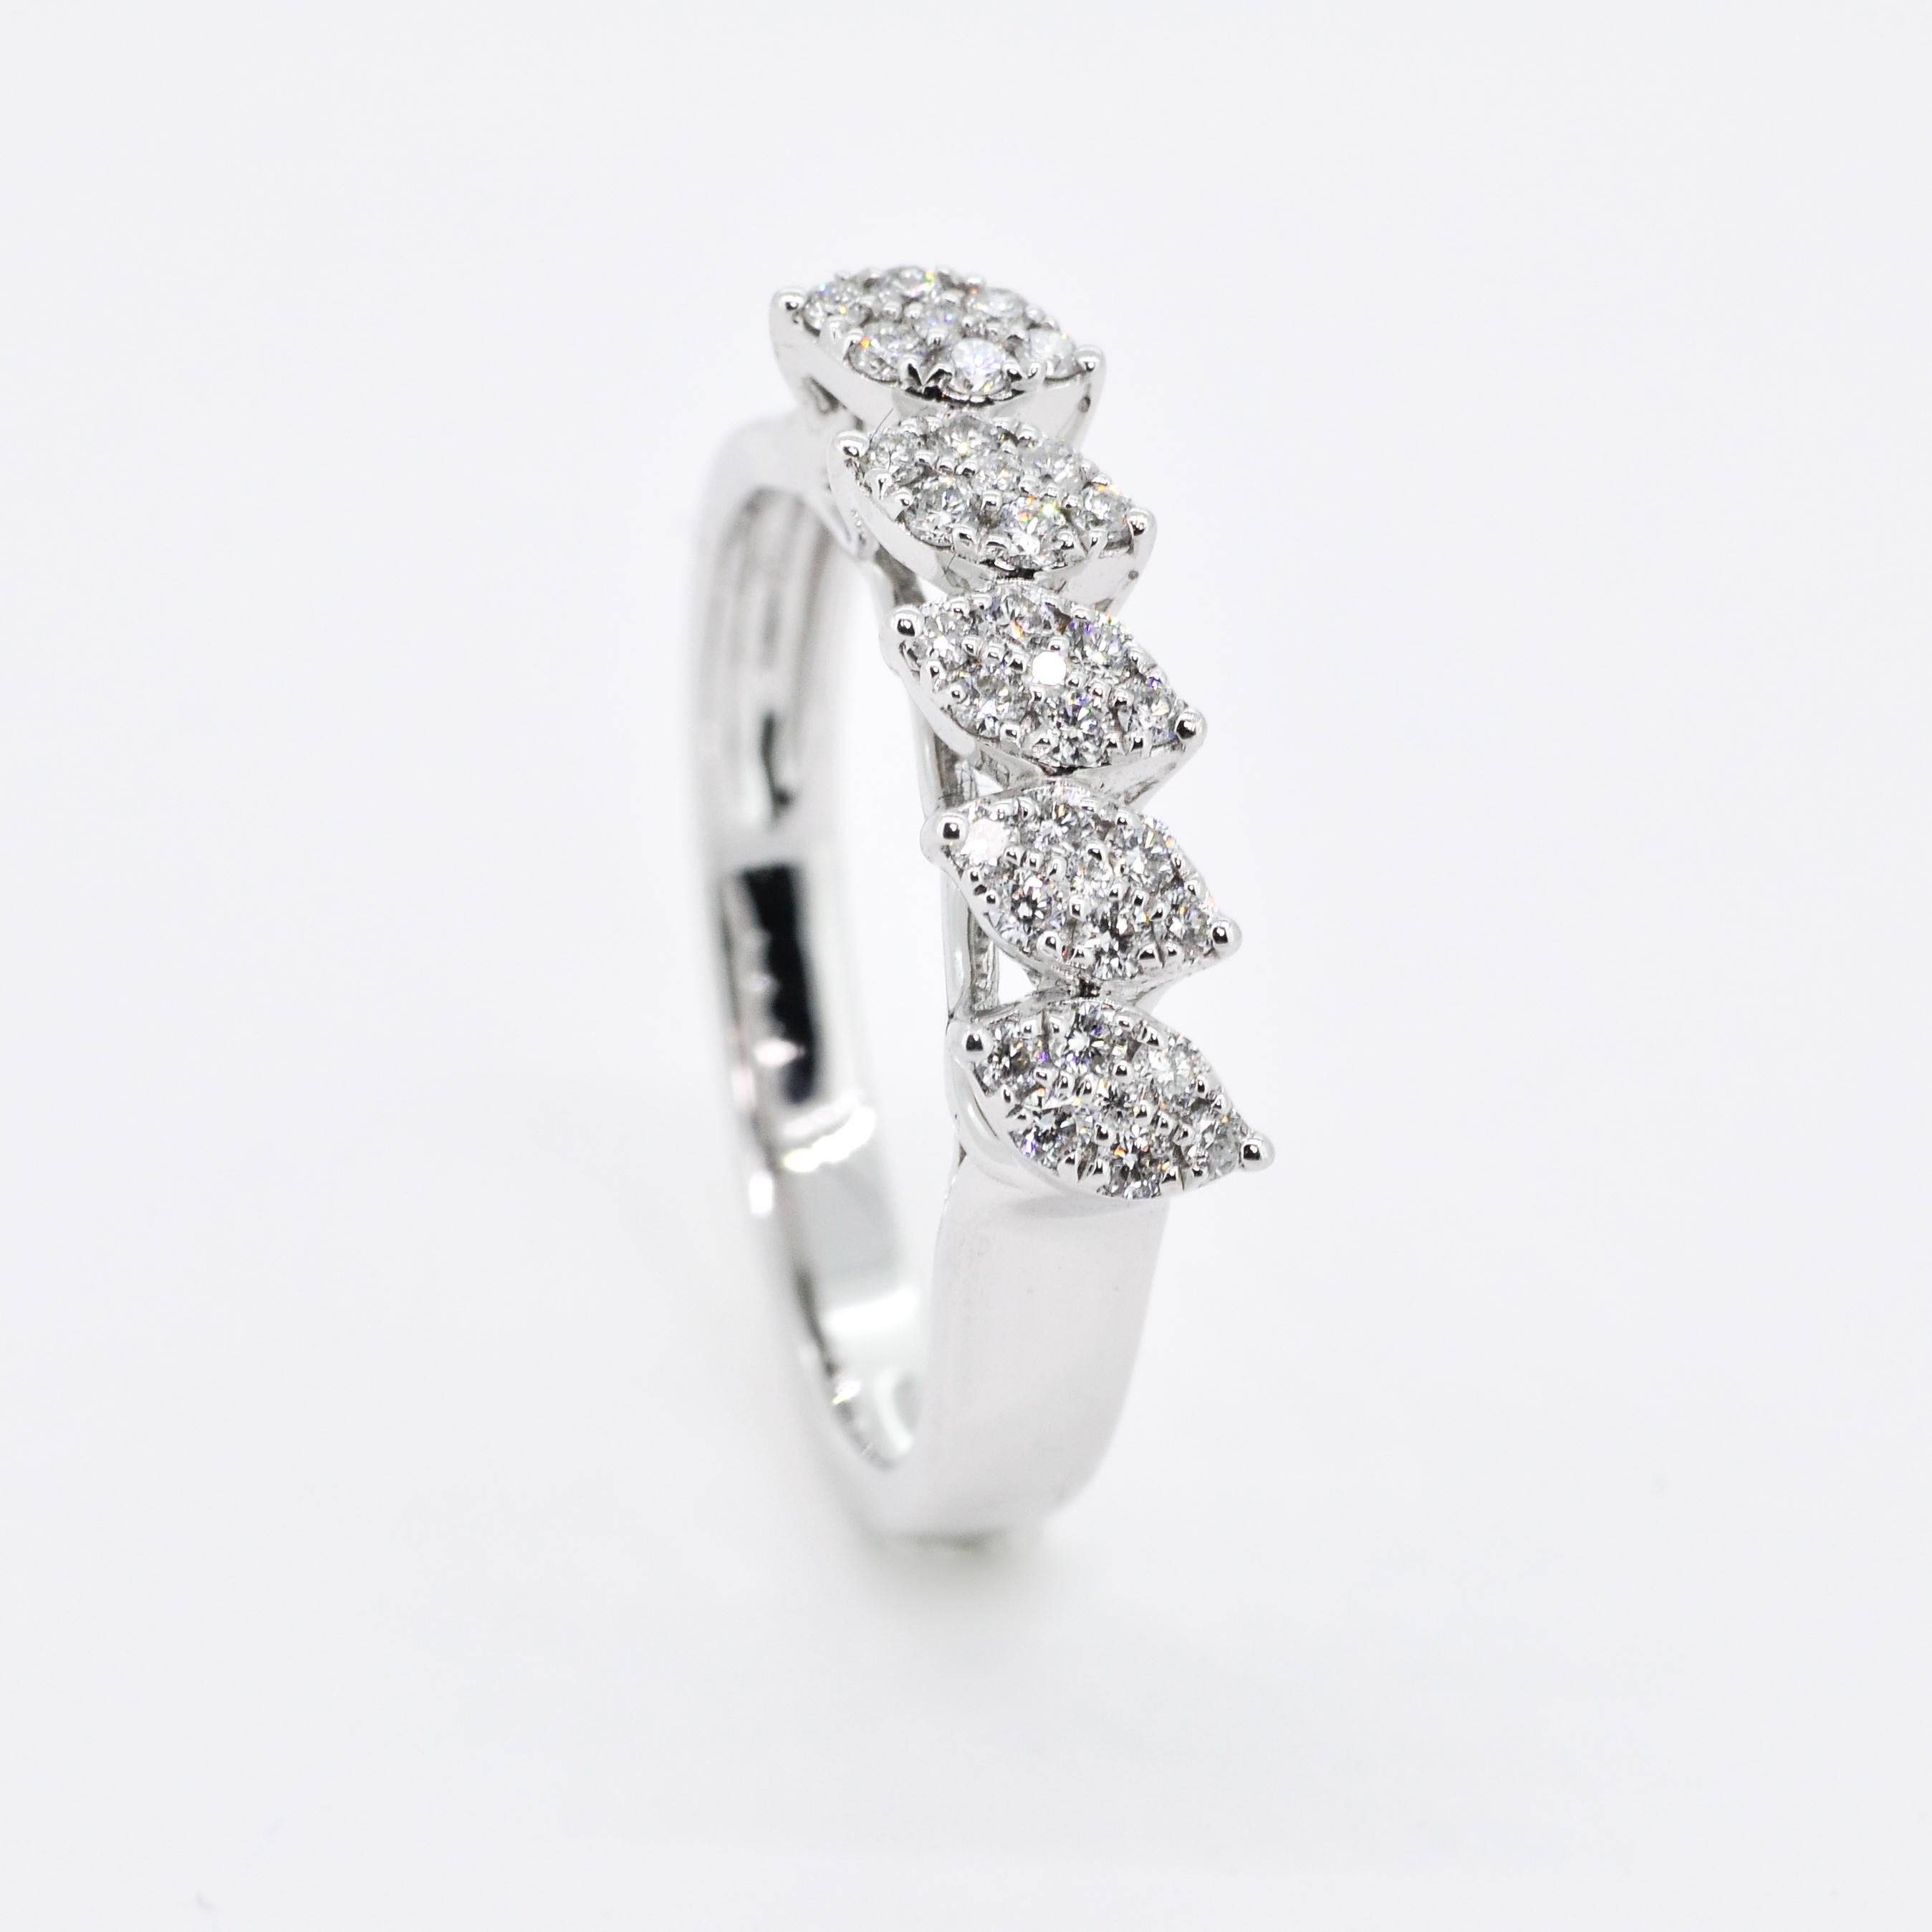  Incredibly glamorous and luxurious, this ring is filled with a cluster of round brilliant diamonds to form the marquise shapes and gives the illusion of 5 large diamonds. Filled with breathtaking sparkle, this white gold diamond marquise cluster